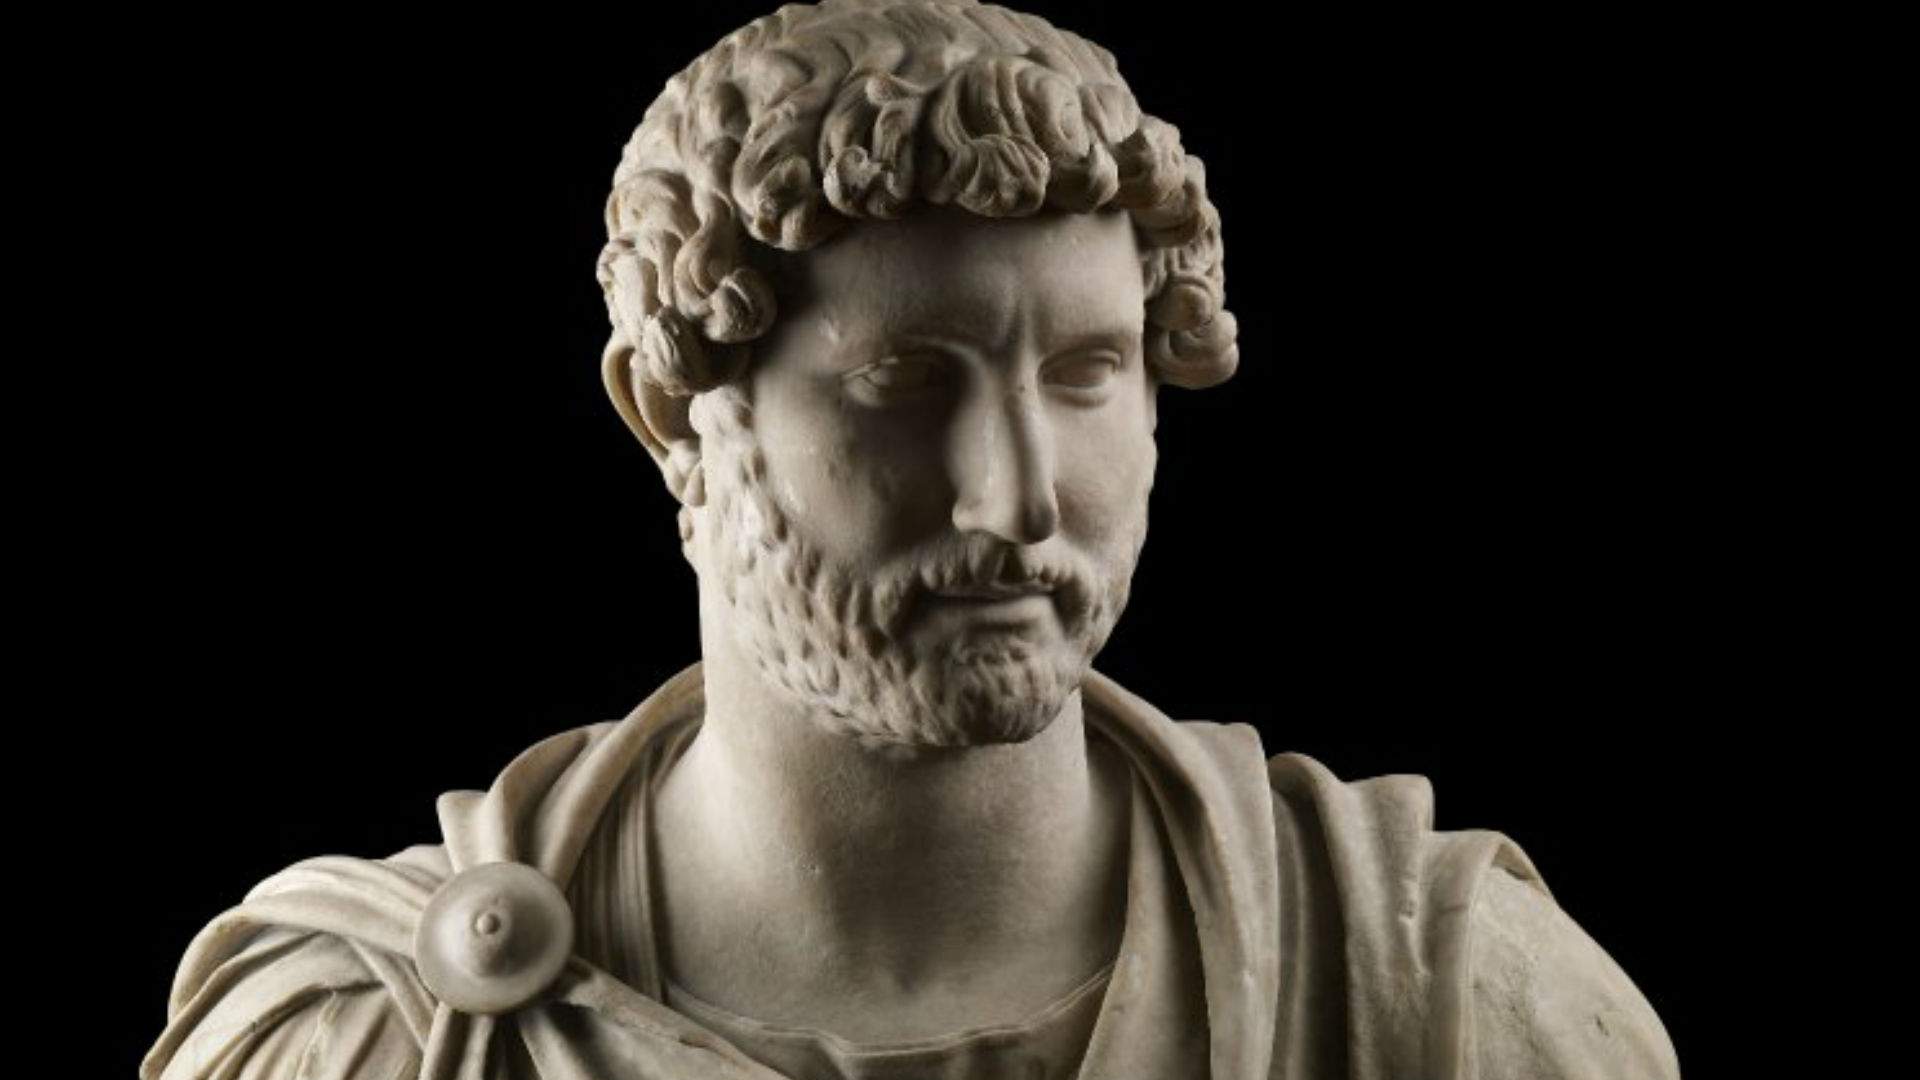 A Major Exhibition of Ancient Greek Treasures Is Finally Coming to Auckland After a Two-Year Delay